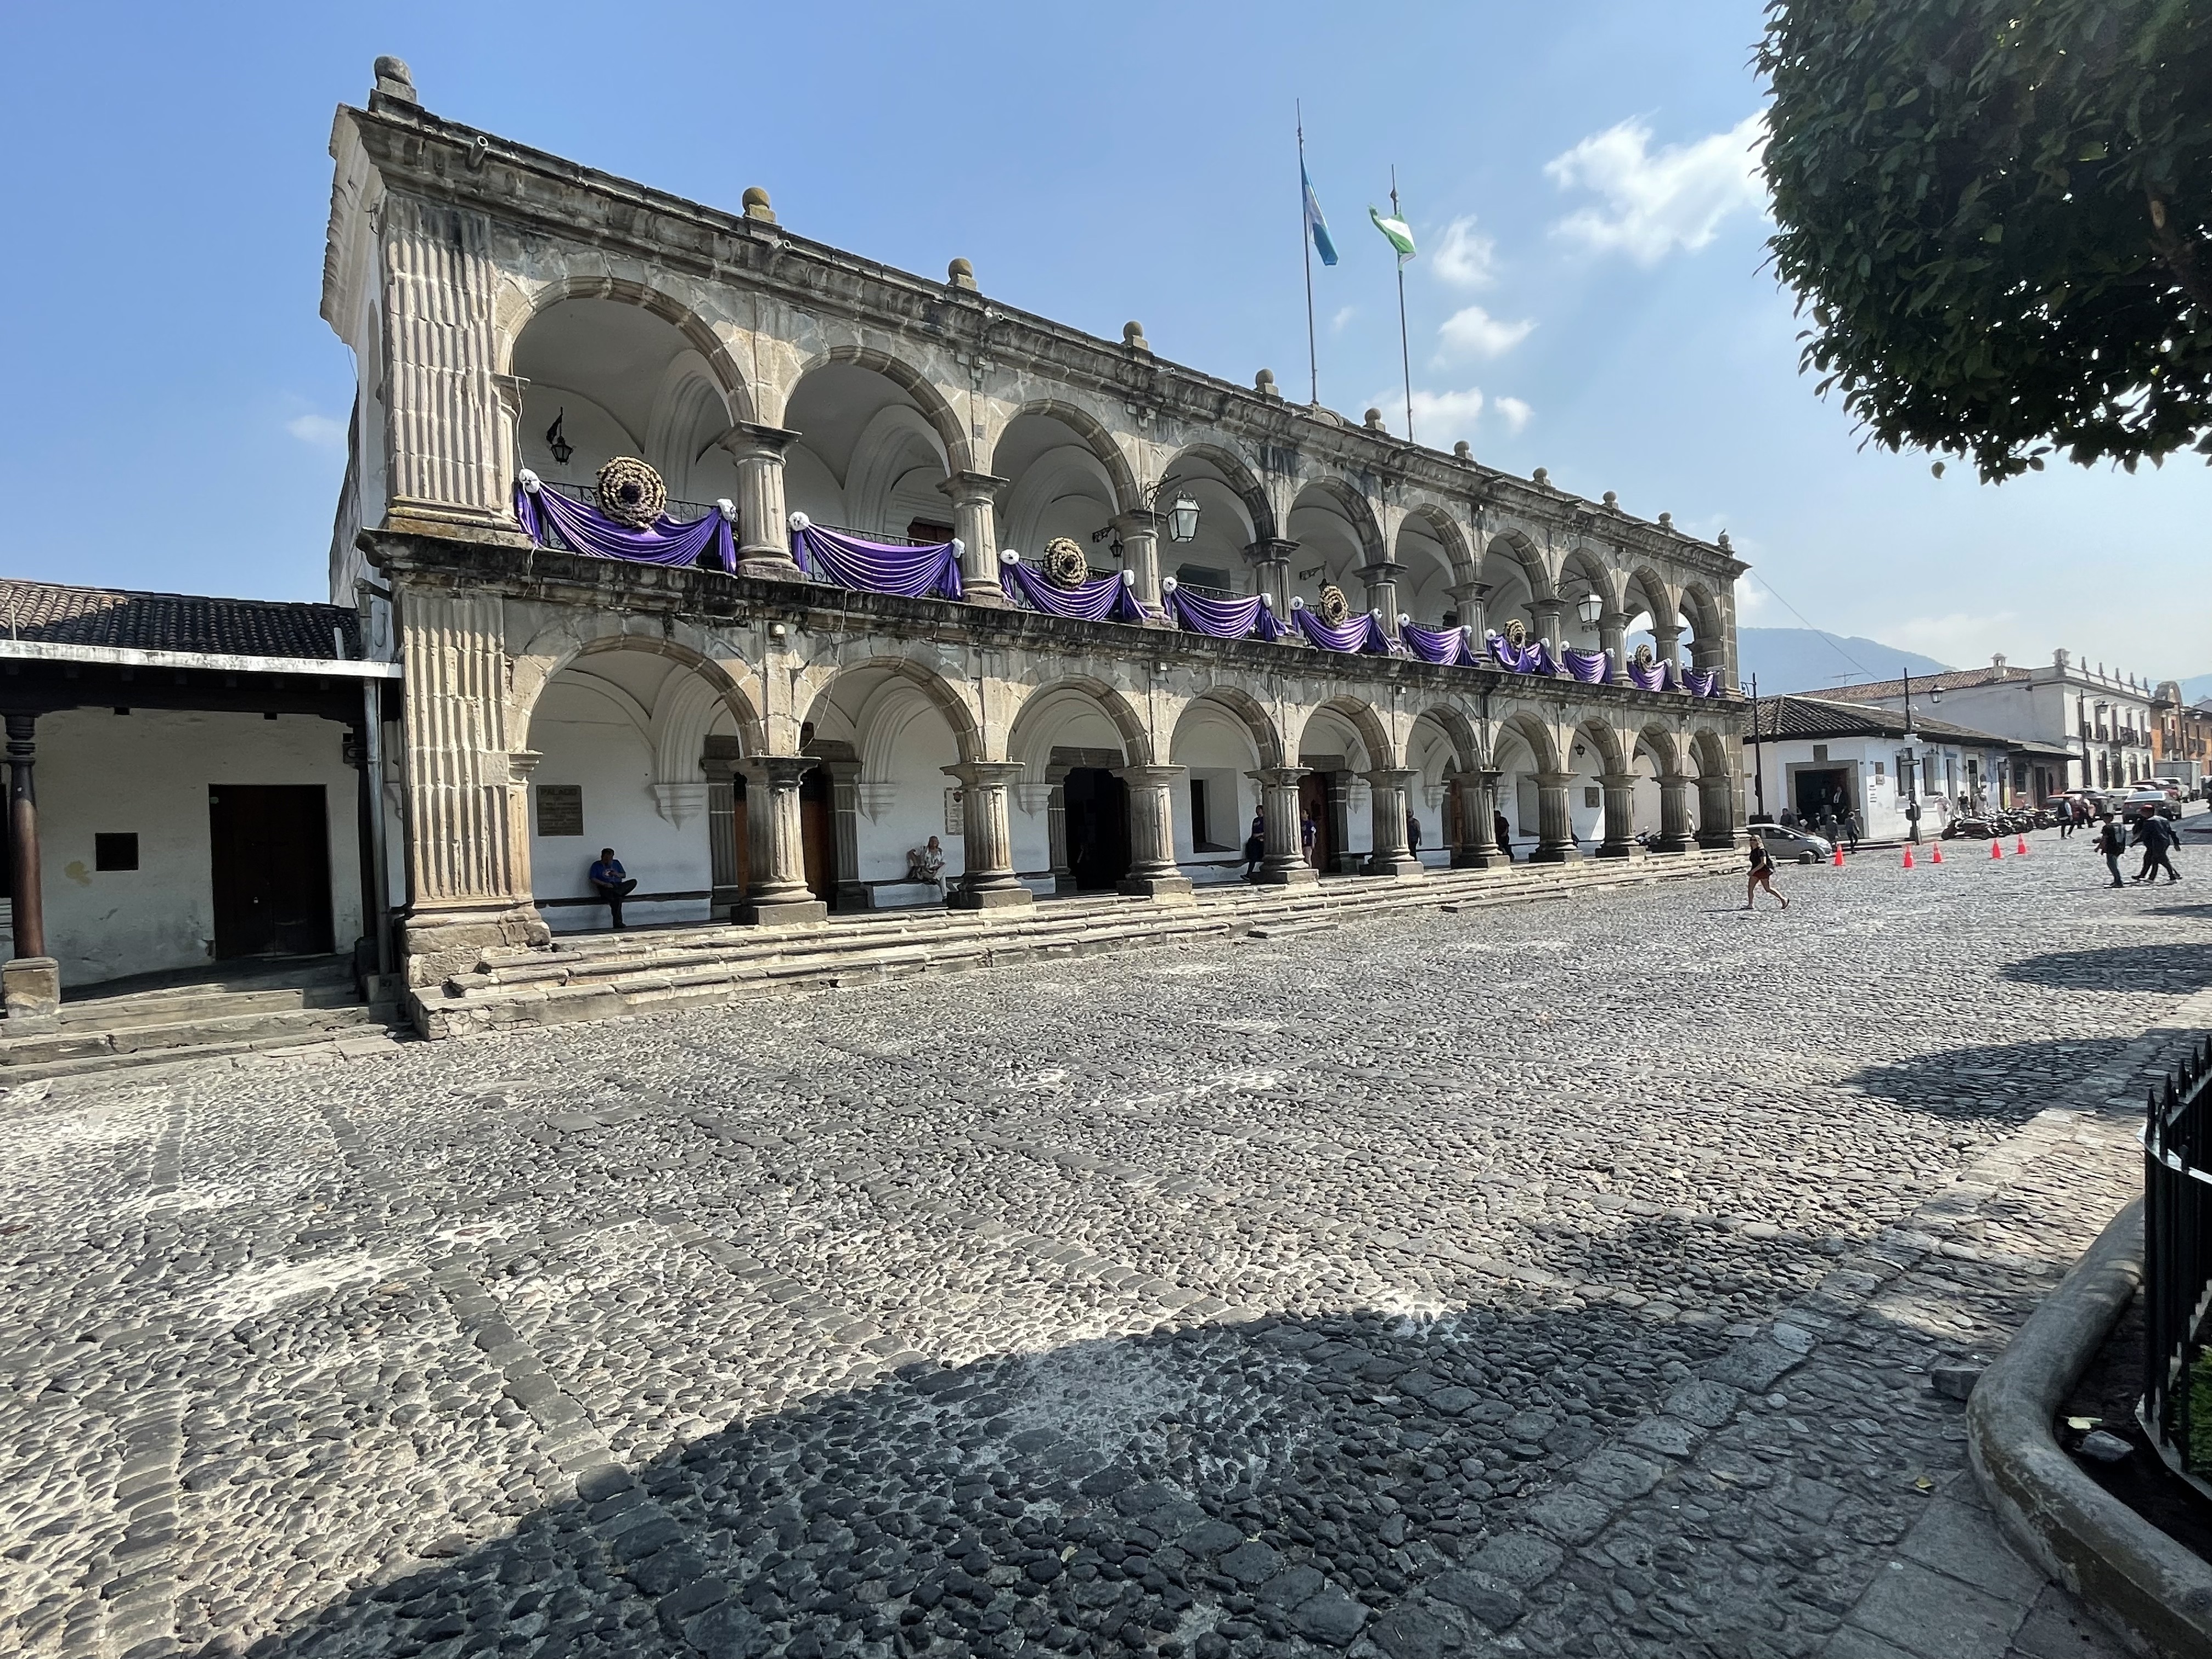 City Hall Palace on Parque Central decorated for Lent, built in 1740. ANNE SURCHIN